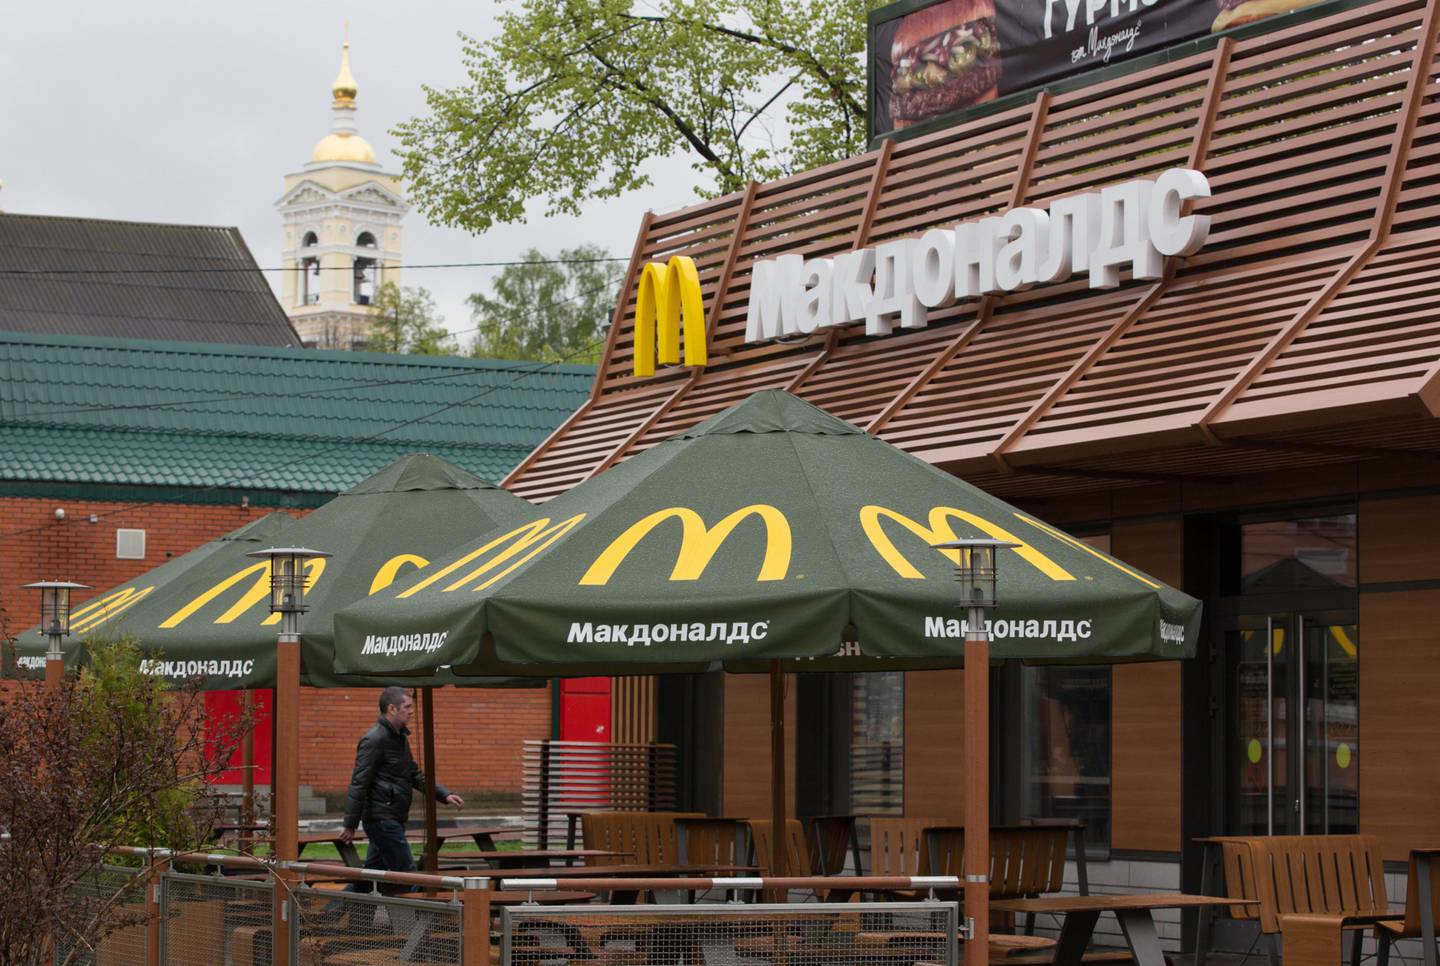 A customer visits a McDonald's Corp. restaurant in Podolsk City, Russia.